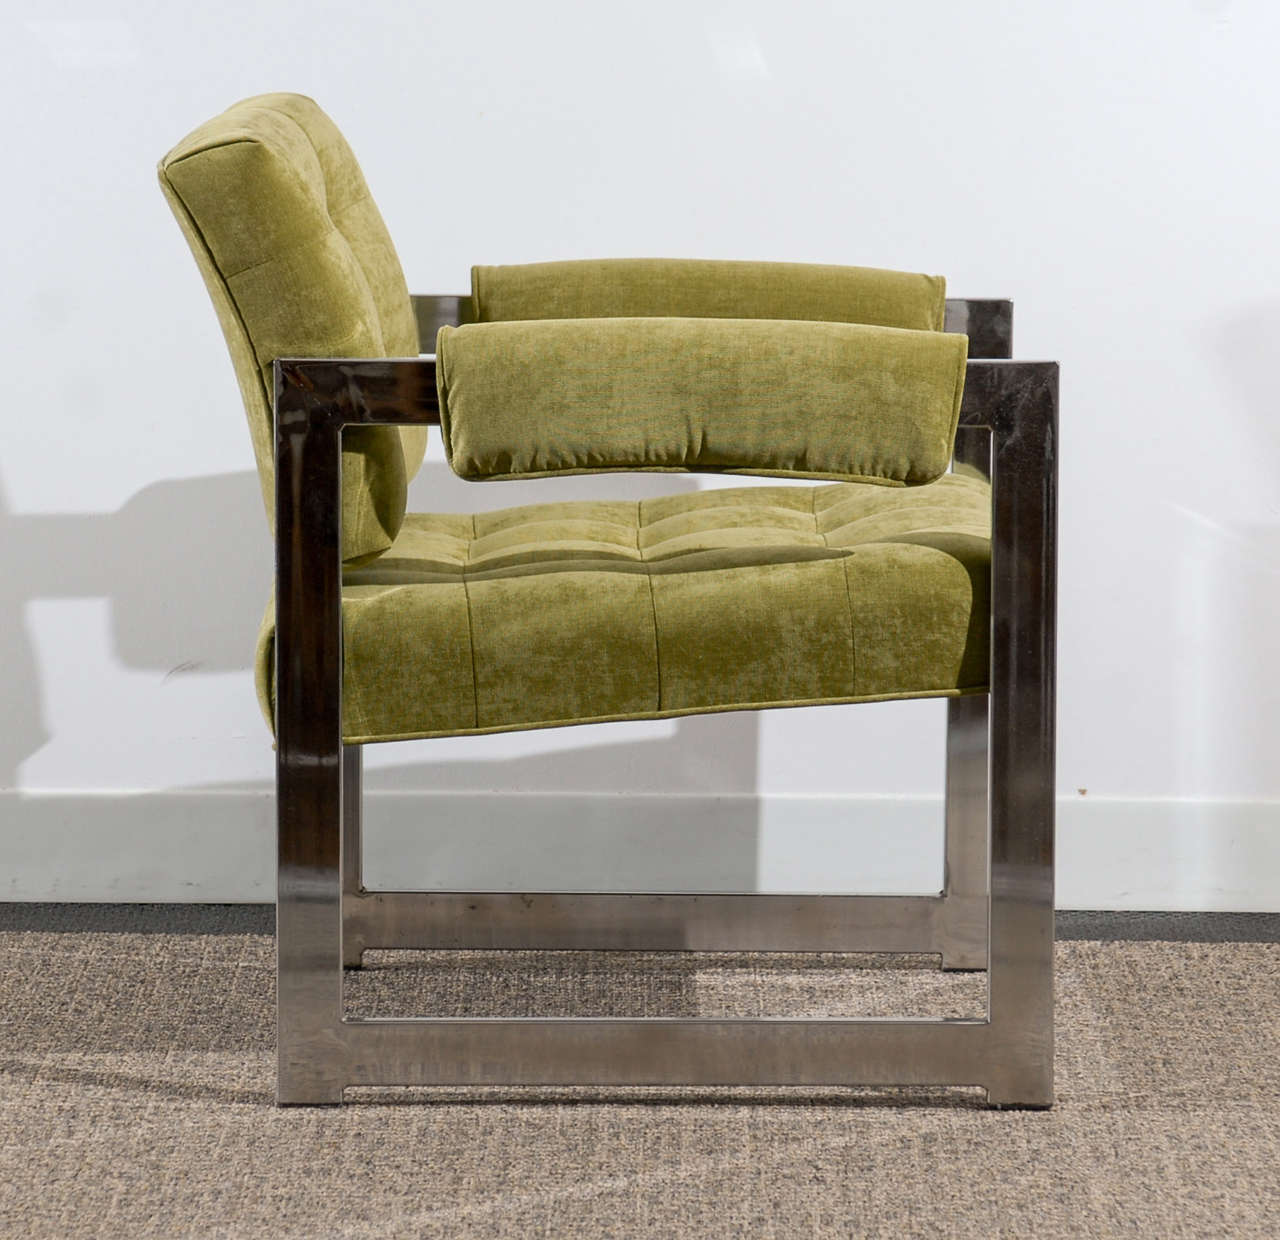 Chrome Stylish Pair of Milo Baughman Style Lounge Chairs in Lime Chenille, circa 1975 For Sale